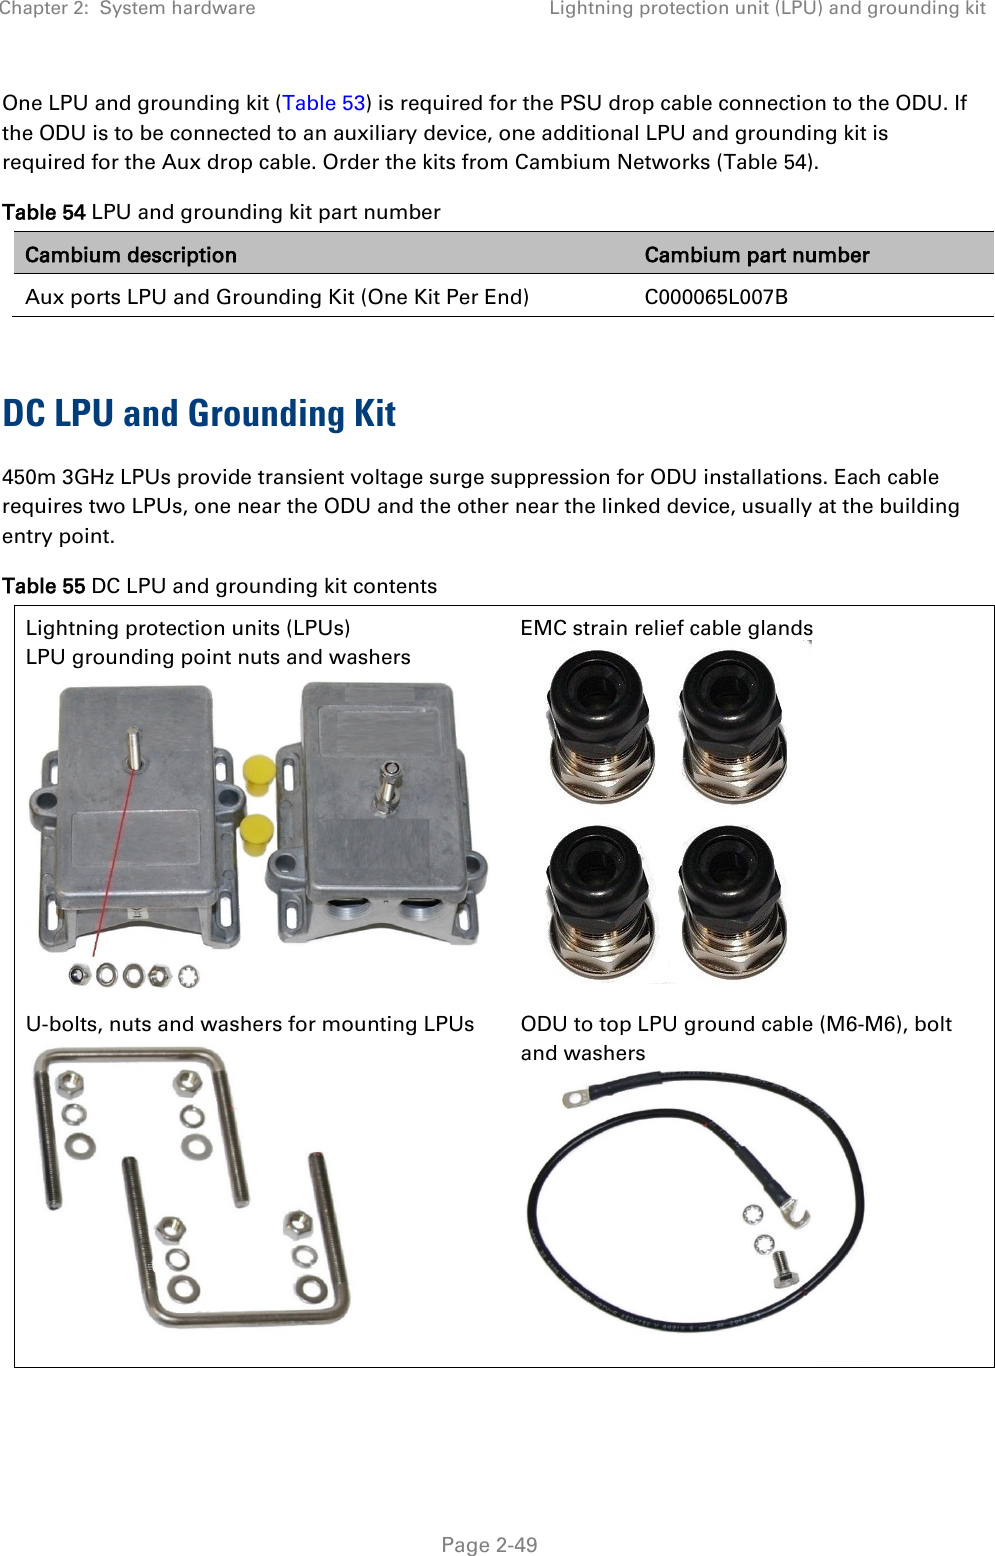 Chapter 2:  System hardware Lightning protection unit (LPU) and grounding kit   Page 2-49 One LPU and grounding kit (Table 53) is required for the PSU drop cable connection to the ODU. If the ODU is to be connected to an auxiliary device, one additional LPU and grounding kit is required for the Aux drop cable. Order the kits from Cambium Networks (Table 54). Table 54 LPU and grounding kit part number Cambium description Cambium part number Aux ports LPU and Grounding Kit (One Kit Per End)   C000065L007B  DC LPU and Grounding Kit 450m 3GHz LPUs provide transient voltage surge suppression for ODU installations. Each cable requires two LPUs, one near the ODU and the other near the linked device, usually at the building entry point.  Table 55 DC LPU and grounding kit contents Lightning protection units (LPUs) LPU grounding point nuts and washers      EMC strain relief cable glands   U-bolts, nuts and washers for mounting LPUs  ODU to top LPU ground cable (M6-M6), bolt and washers   